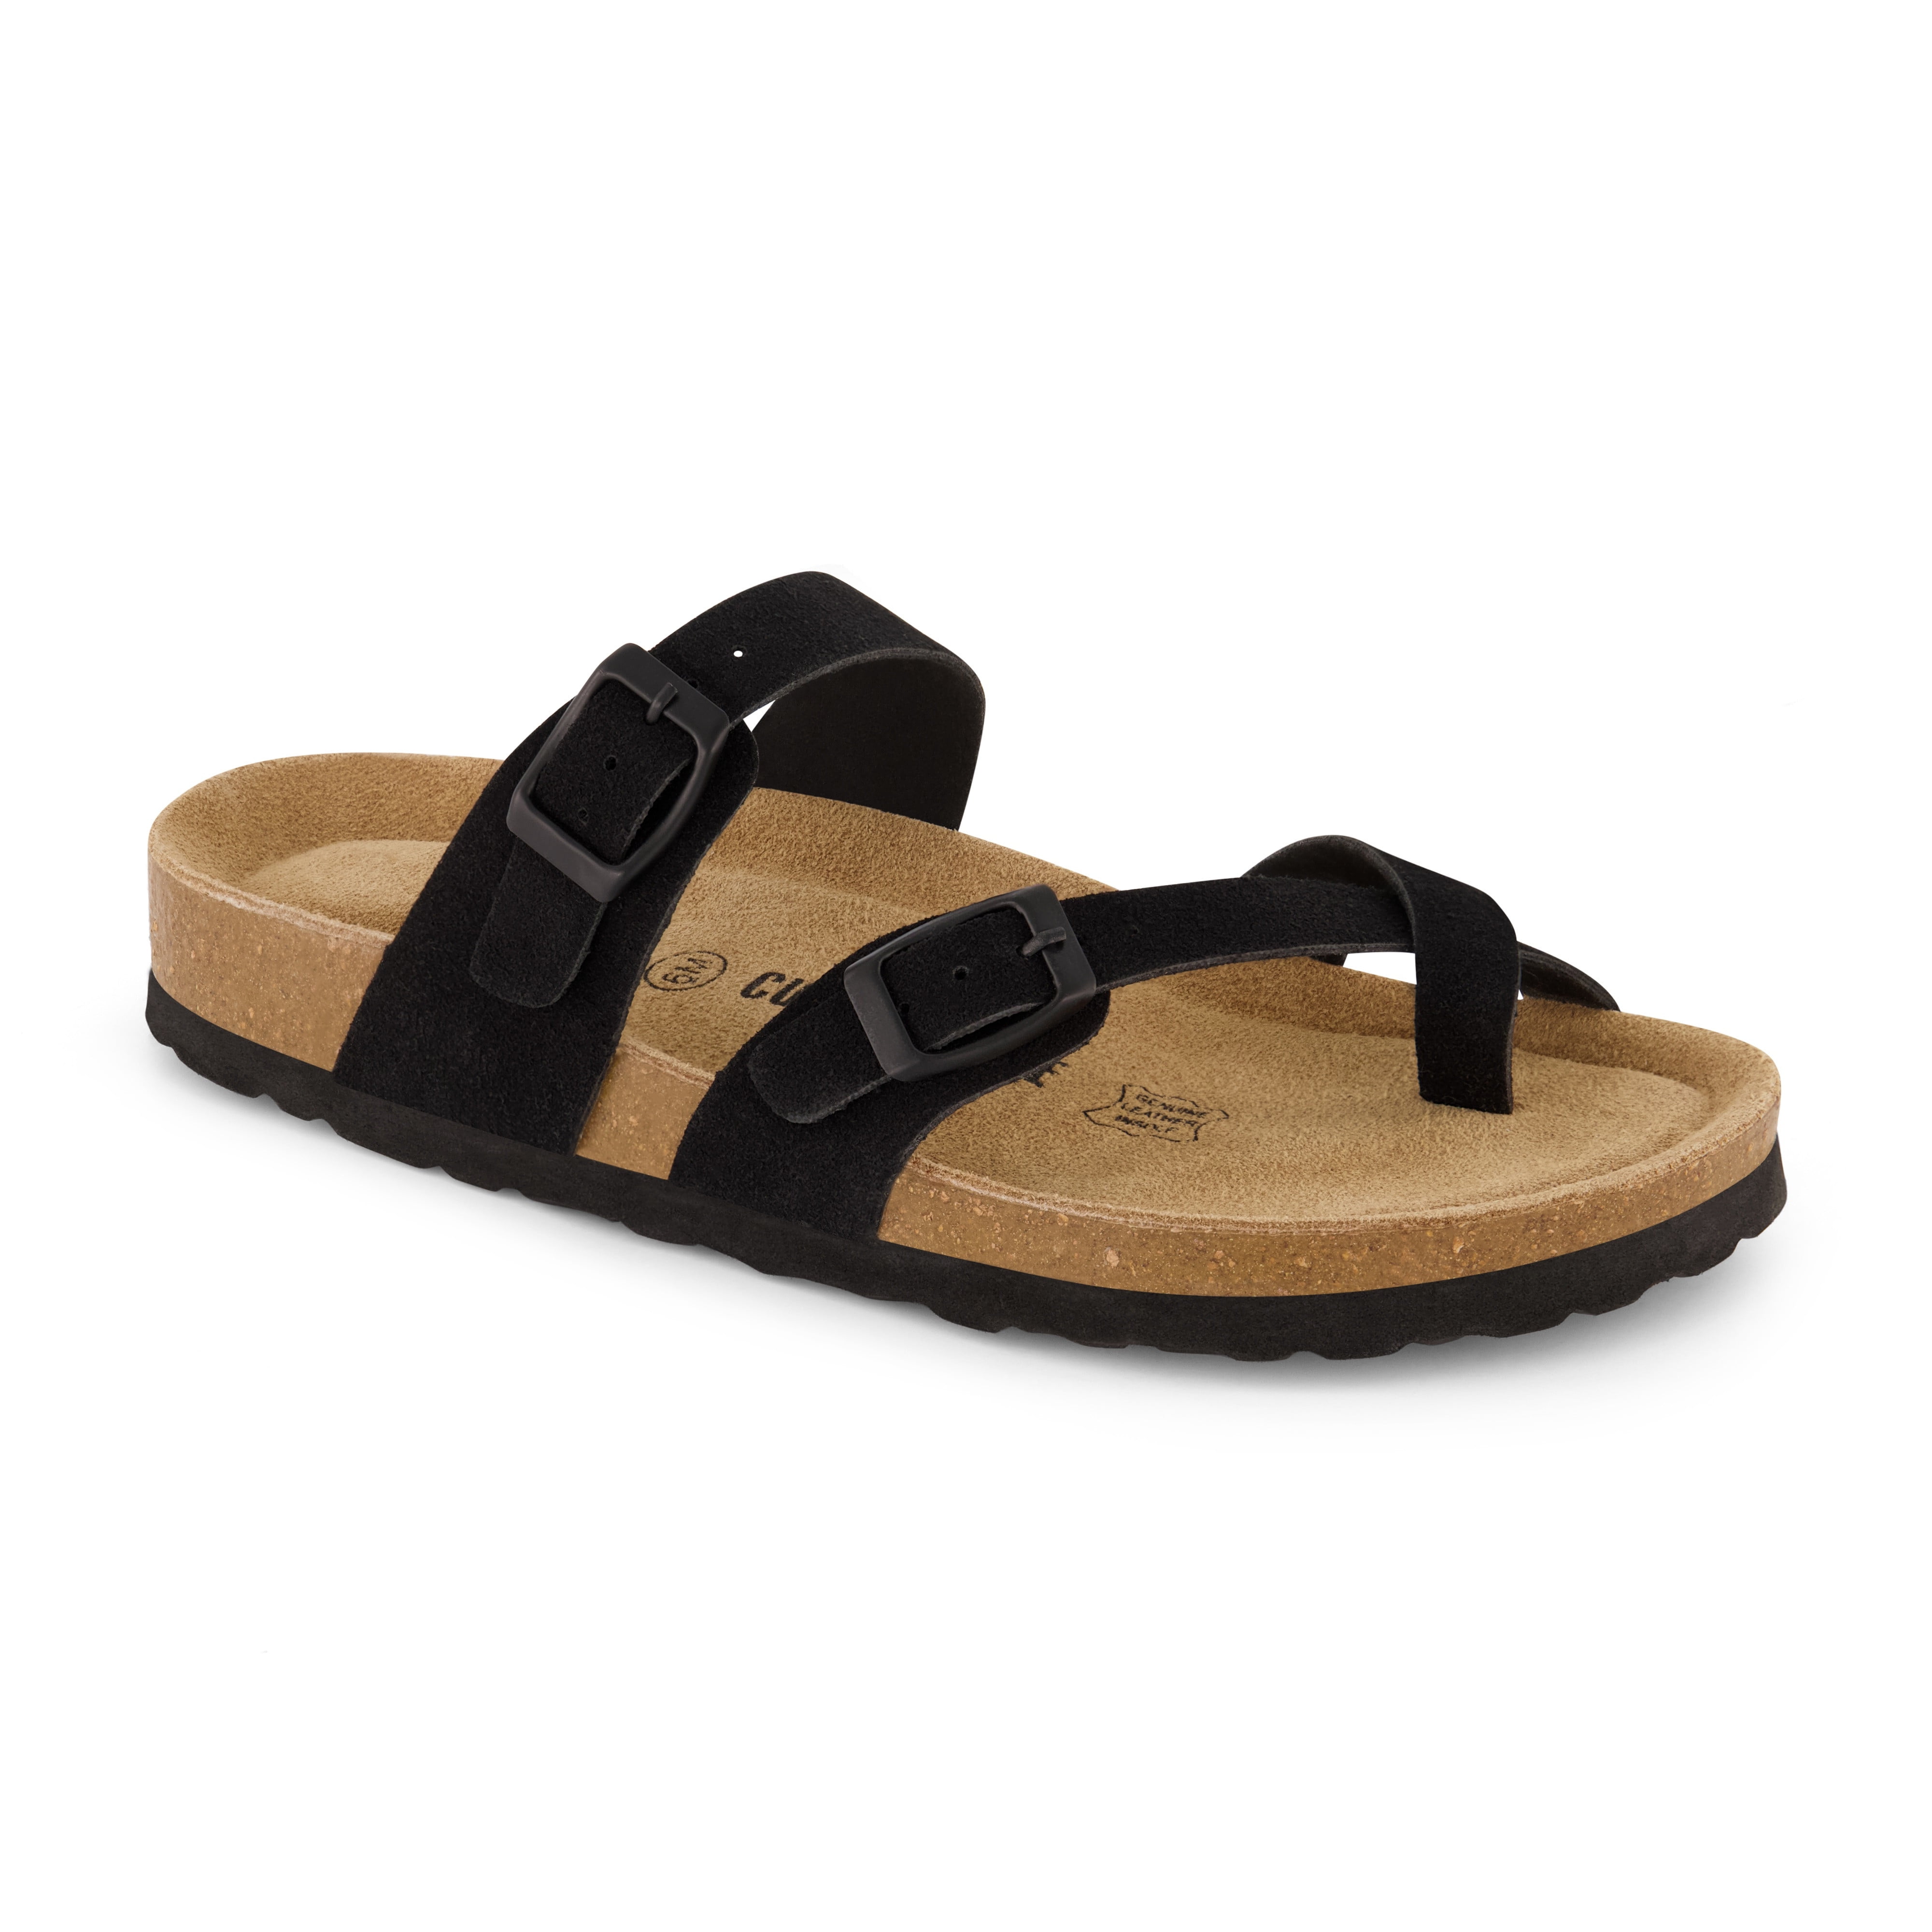 Comfort Women's Cushionaire Luna Cork footbed Sandal with 